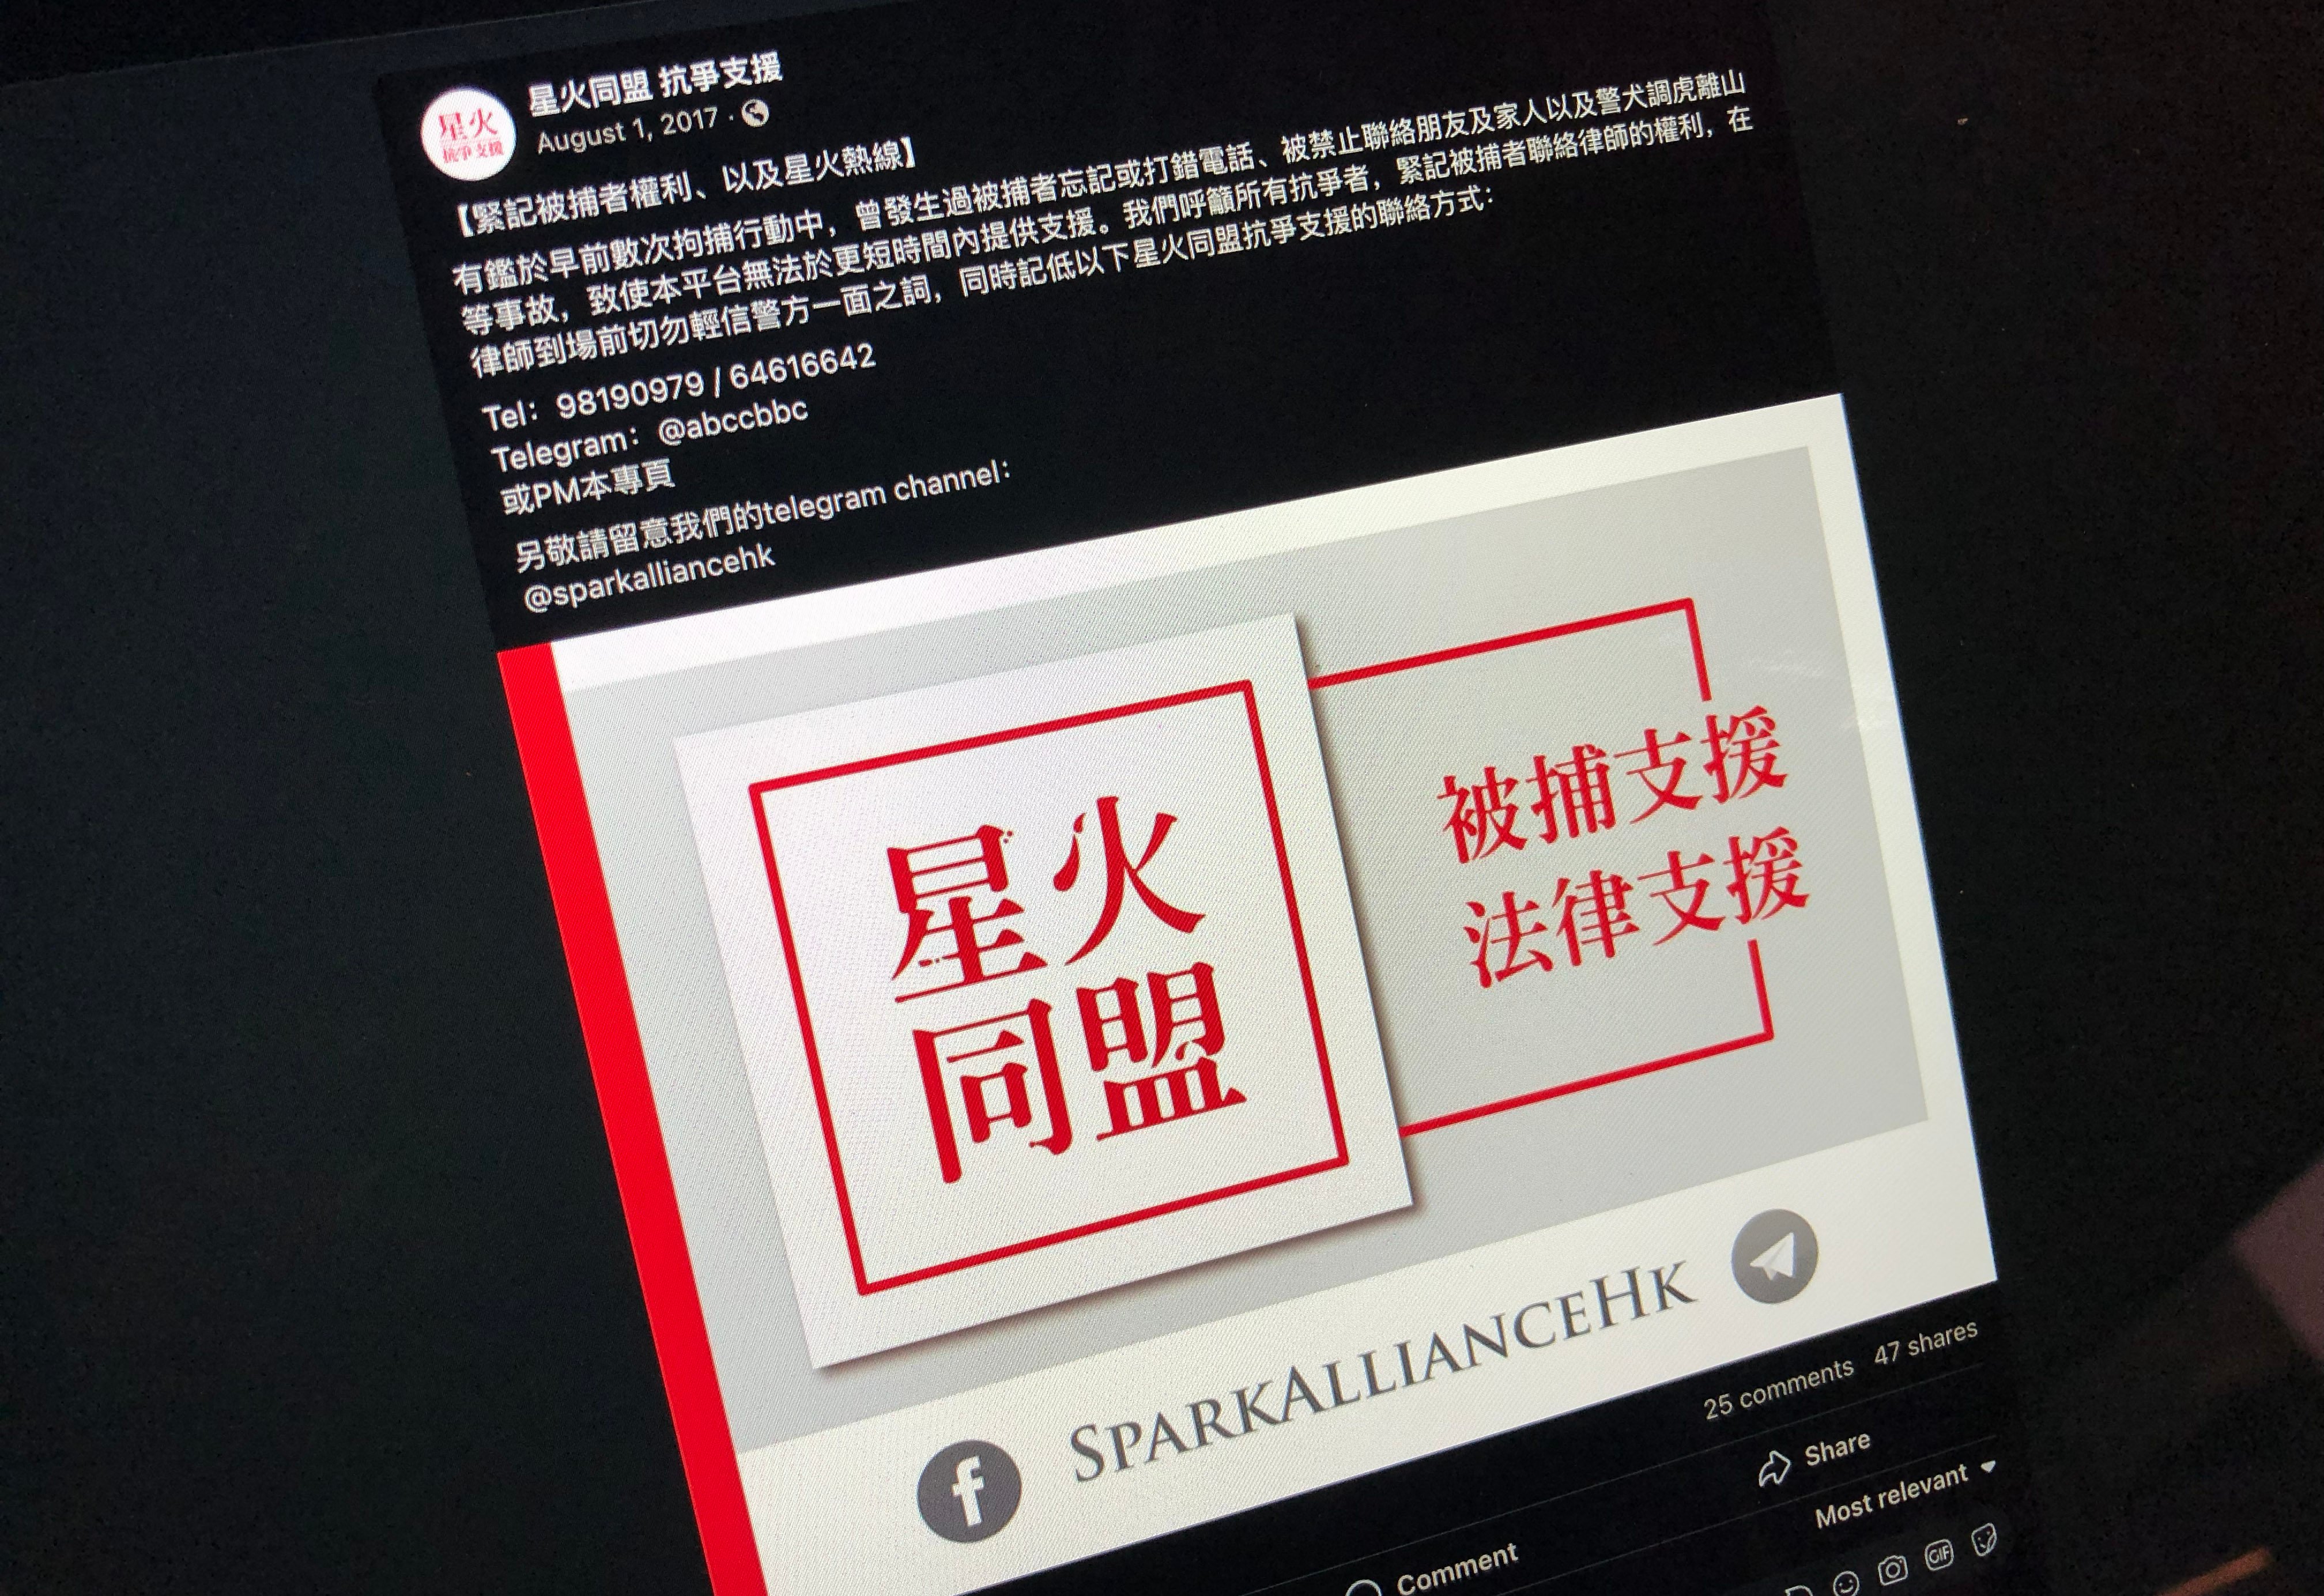 The Spark Alliance HK Facebook page, which can still be found online. Photo: Handout